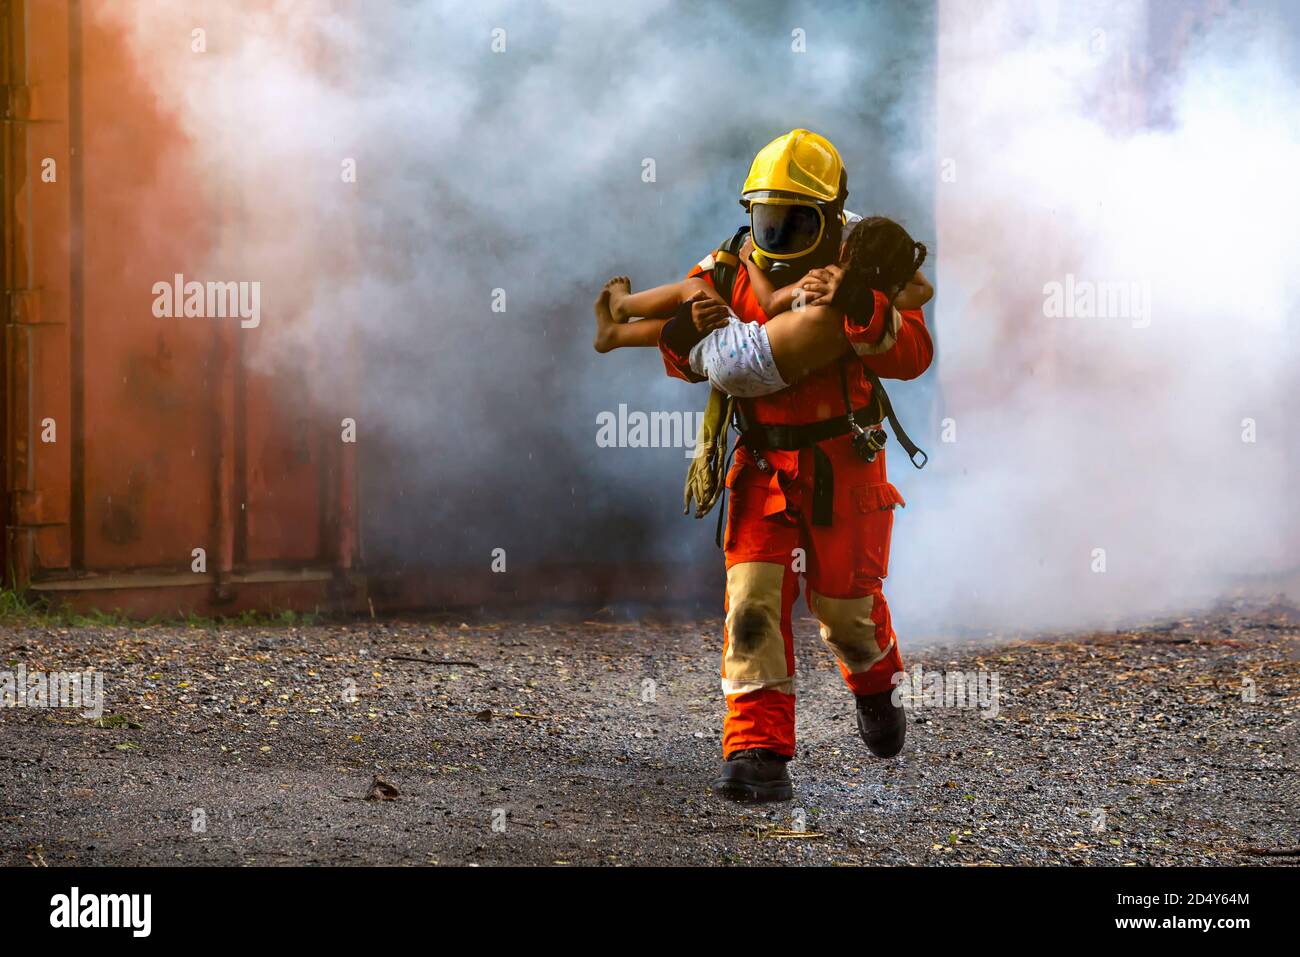 Firefighter rescue, Fireman walking out from burning building and hold save a child in his arms from fire incident. Stock Photo